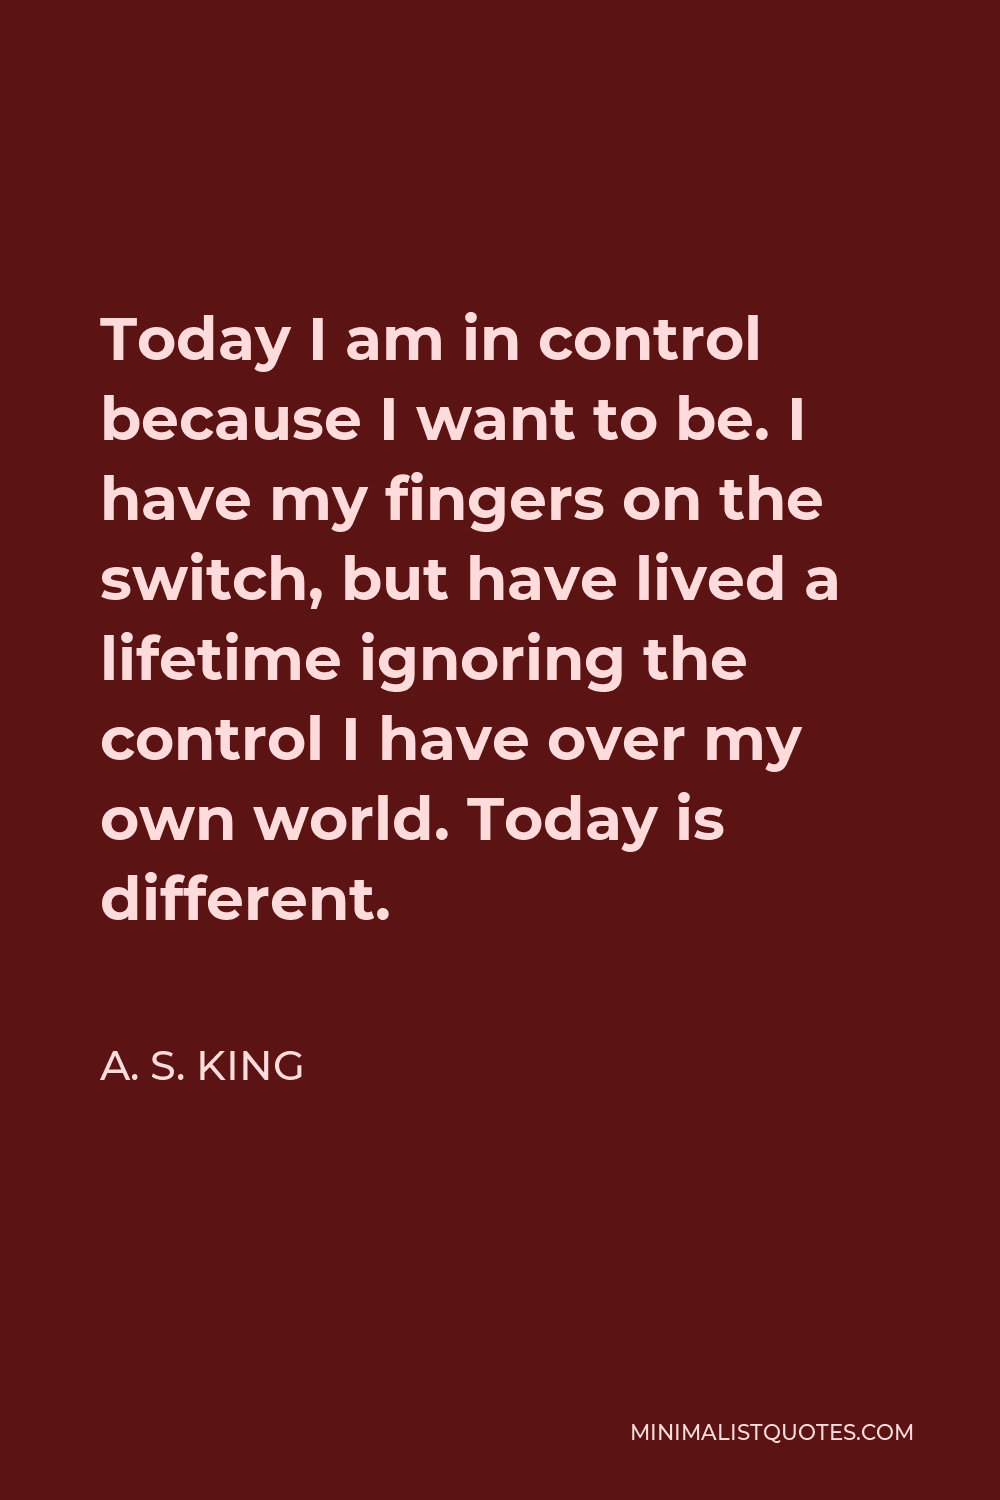 A. S. King Quote - Today I am in control because I want to be. I have my fingers on the switch, but have lived a lifetime ignoring the control I have over my own world. Today is different.